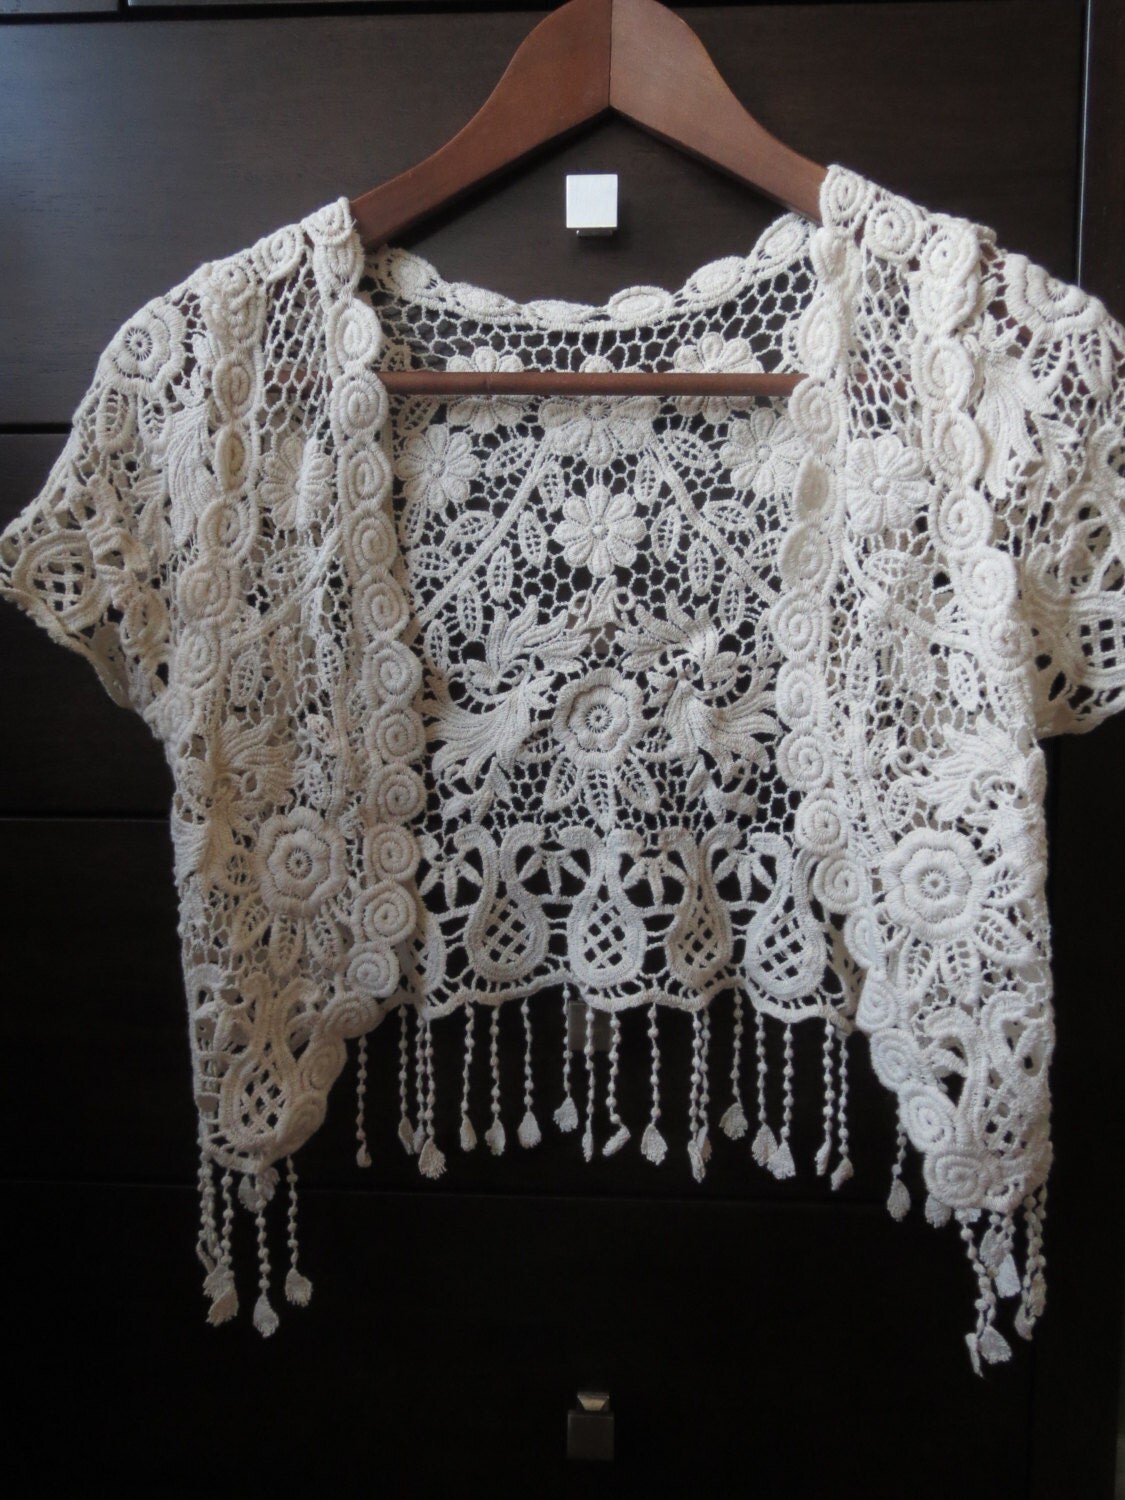 Crochet Lace Shawl Open Style Cardigan with Tassels One Size